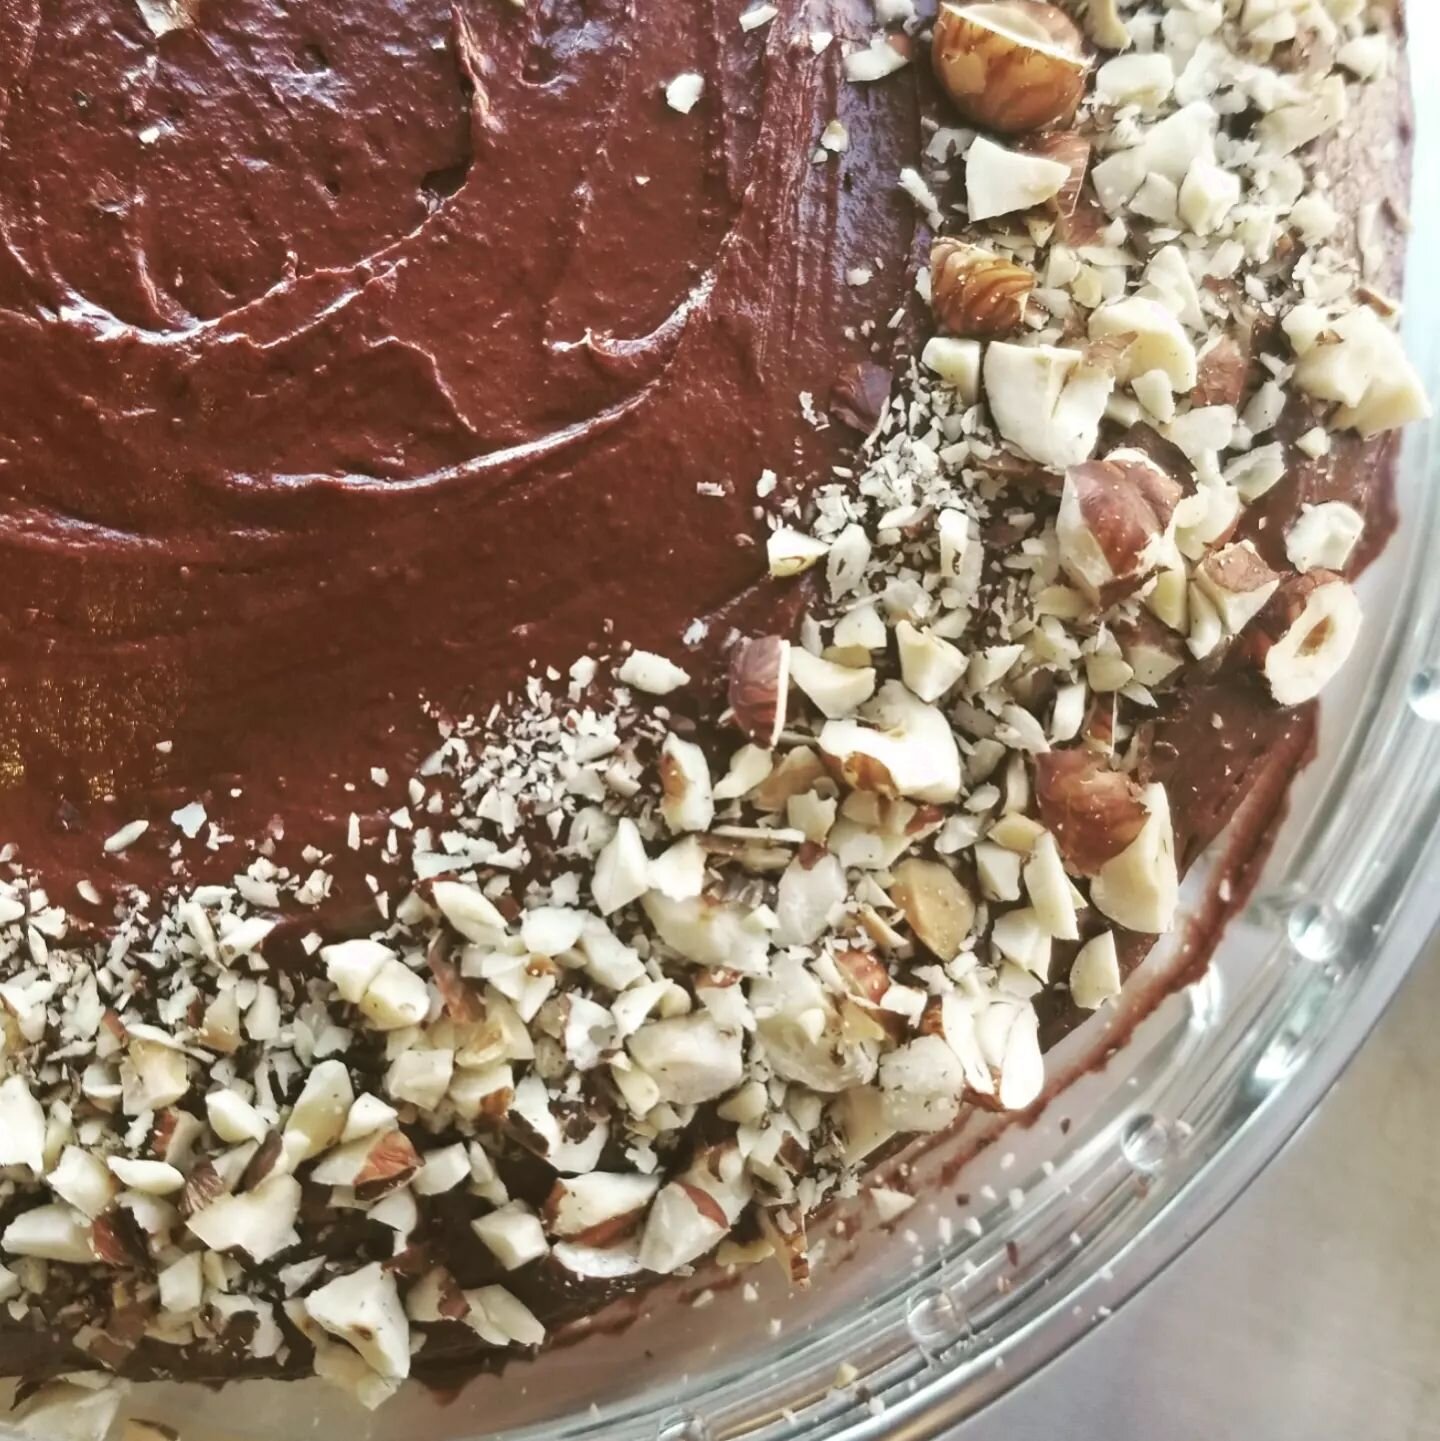 Beet Hazelnut Chocolate Cake is available this weekend. This is a velvety vegan cake with reddish interior slathered with luxurious chocolate frosting and adorned with roasted hazelnuts.

#warwicknewyork #chocolate #beet #hazelnut #vegan #sweet #huds